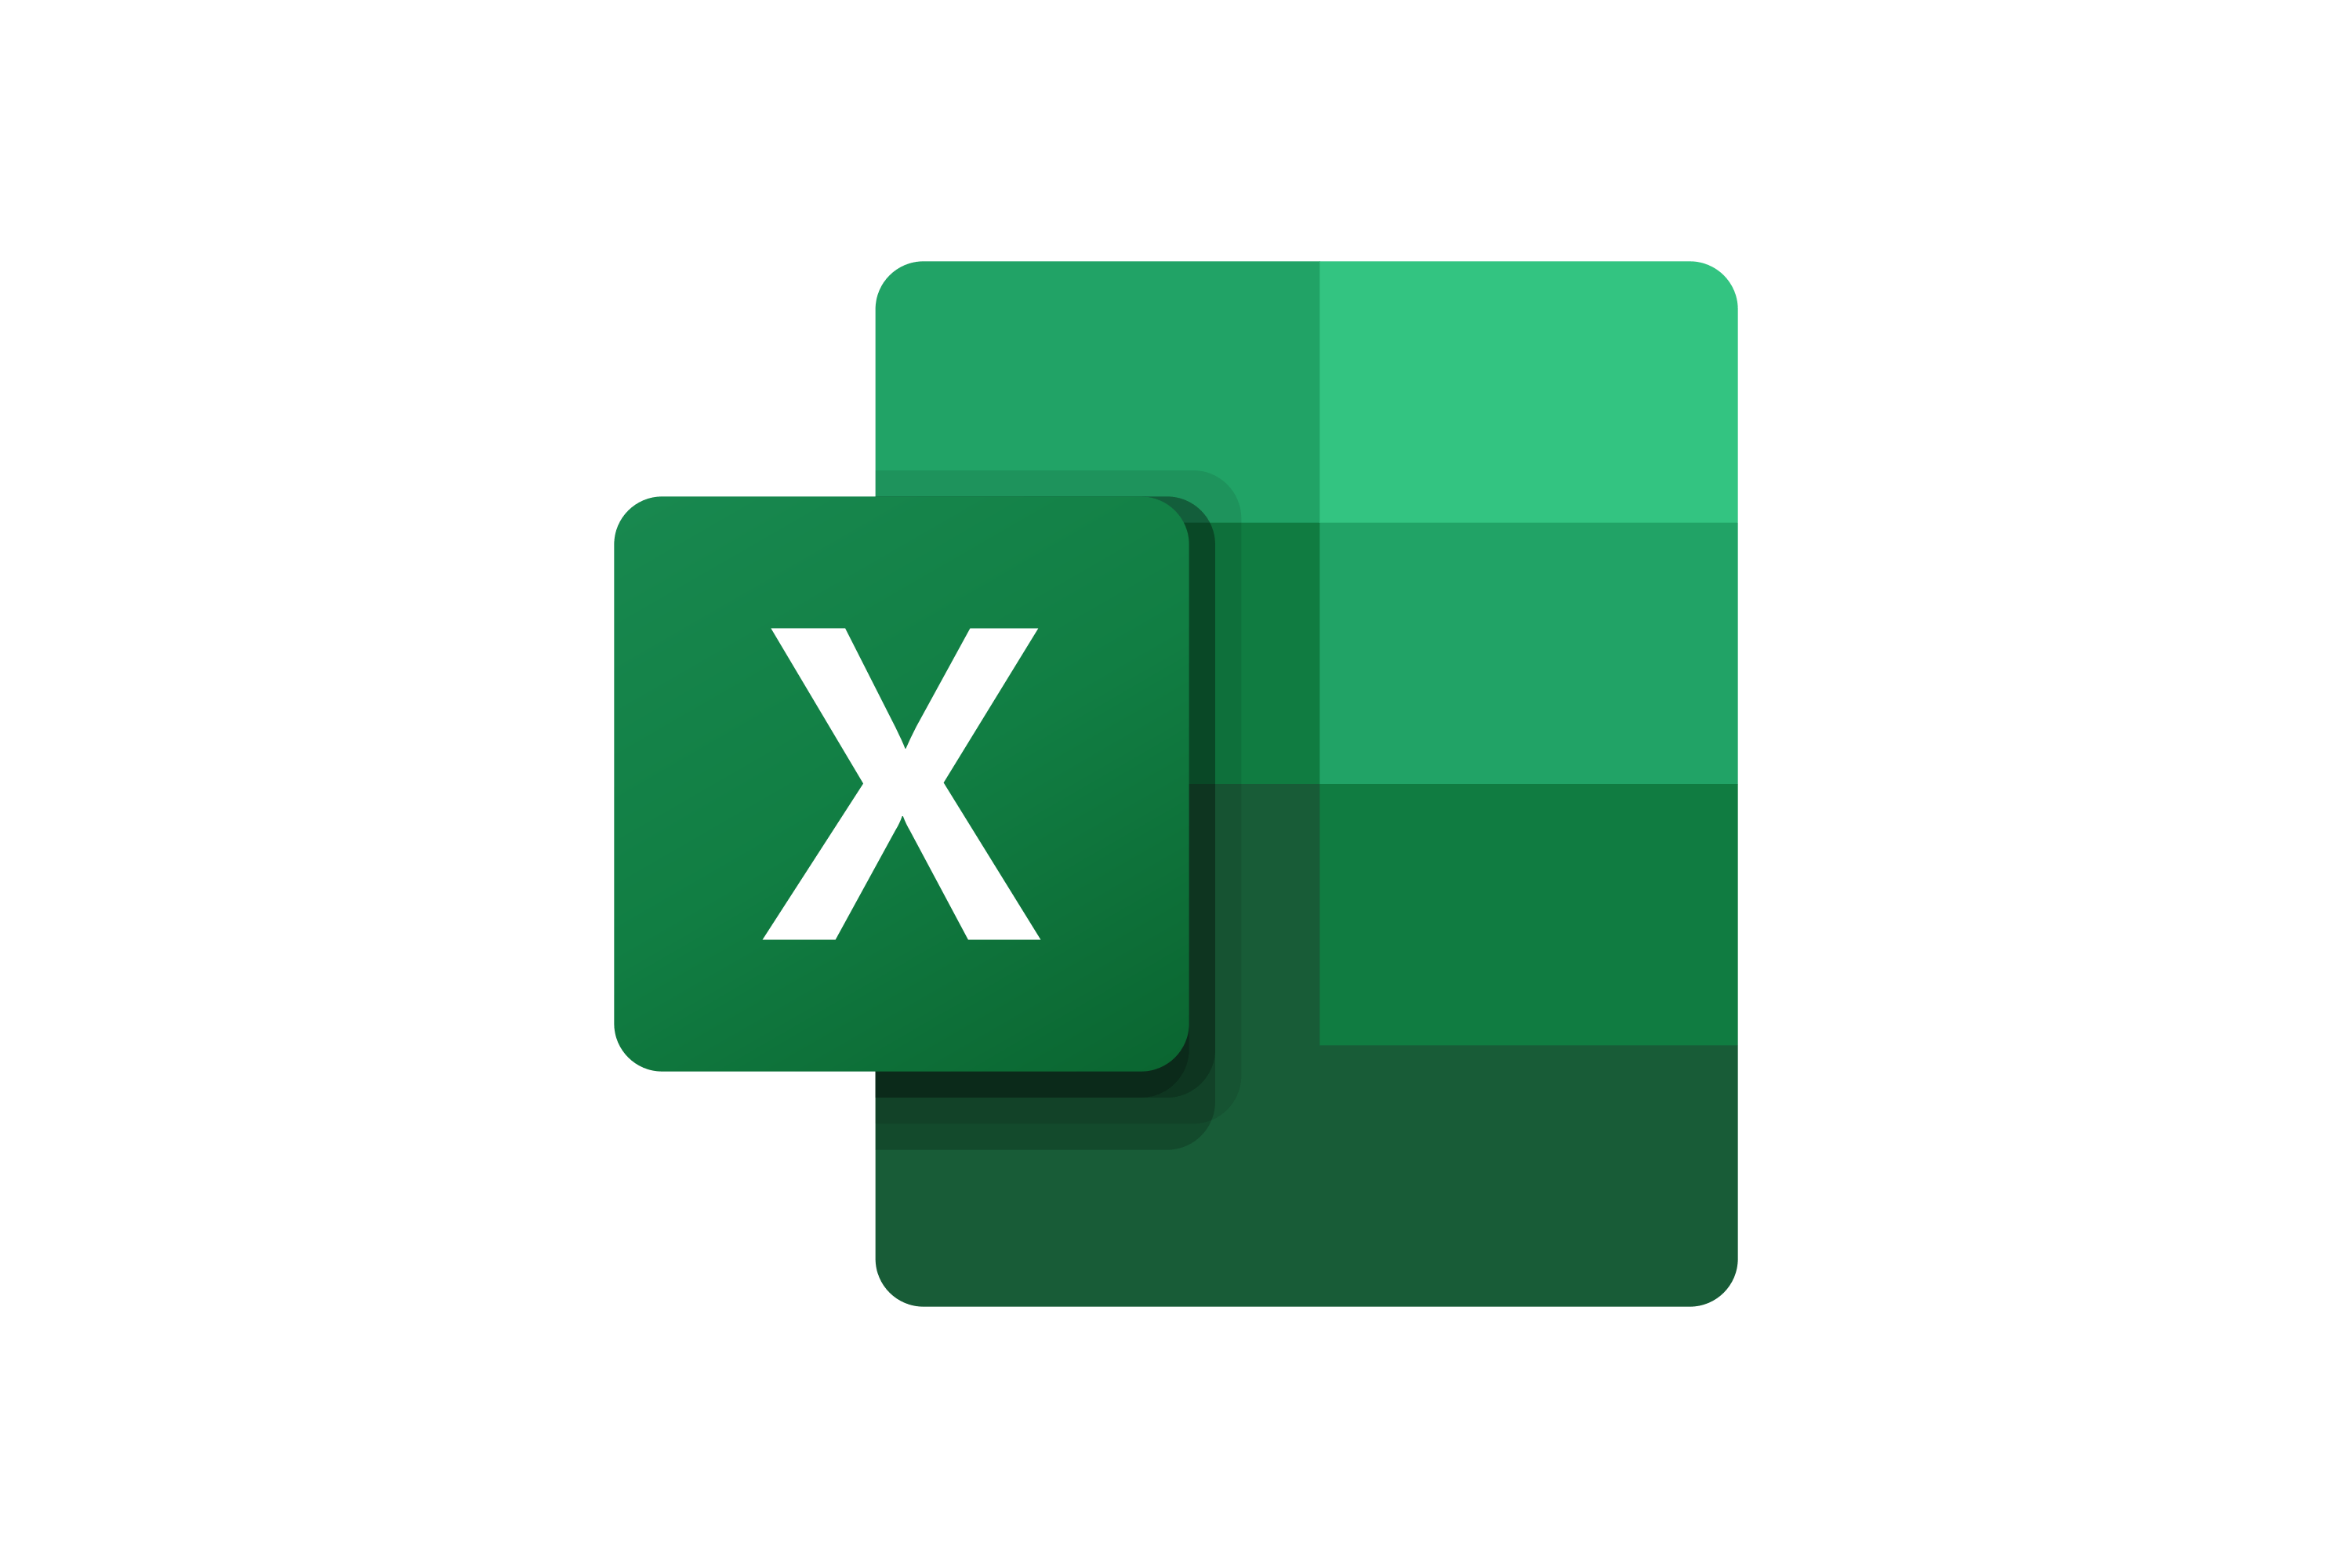 Microsoft Excel is one of the most used spreadsheet tools in Accounting Careers